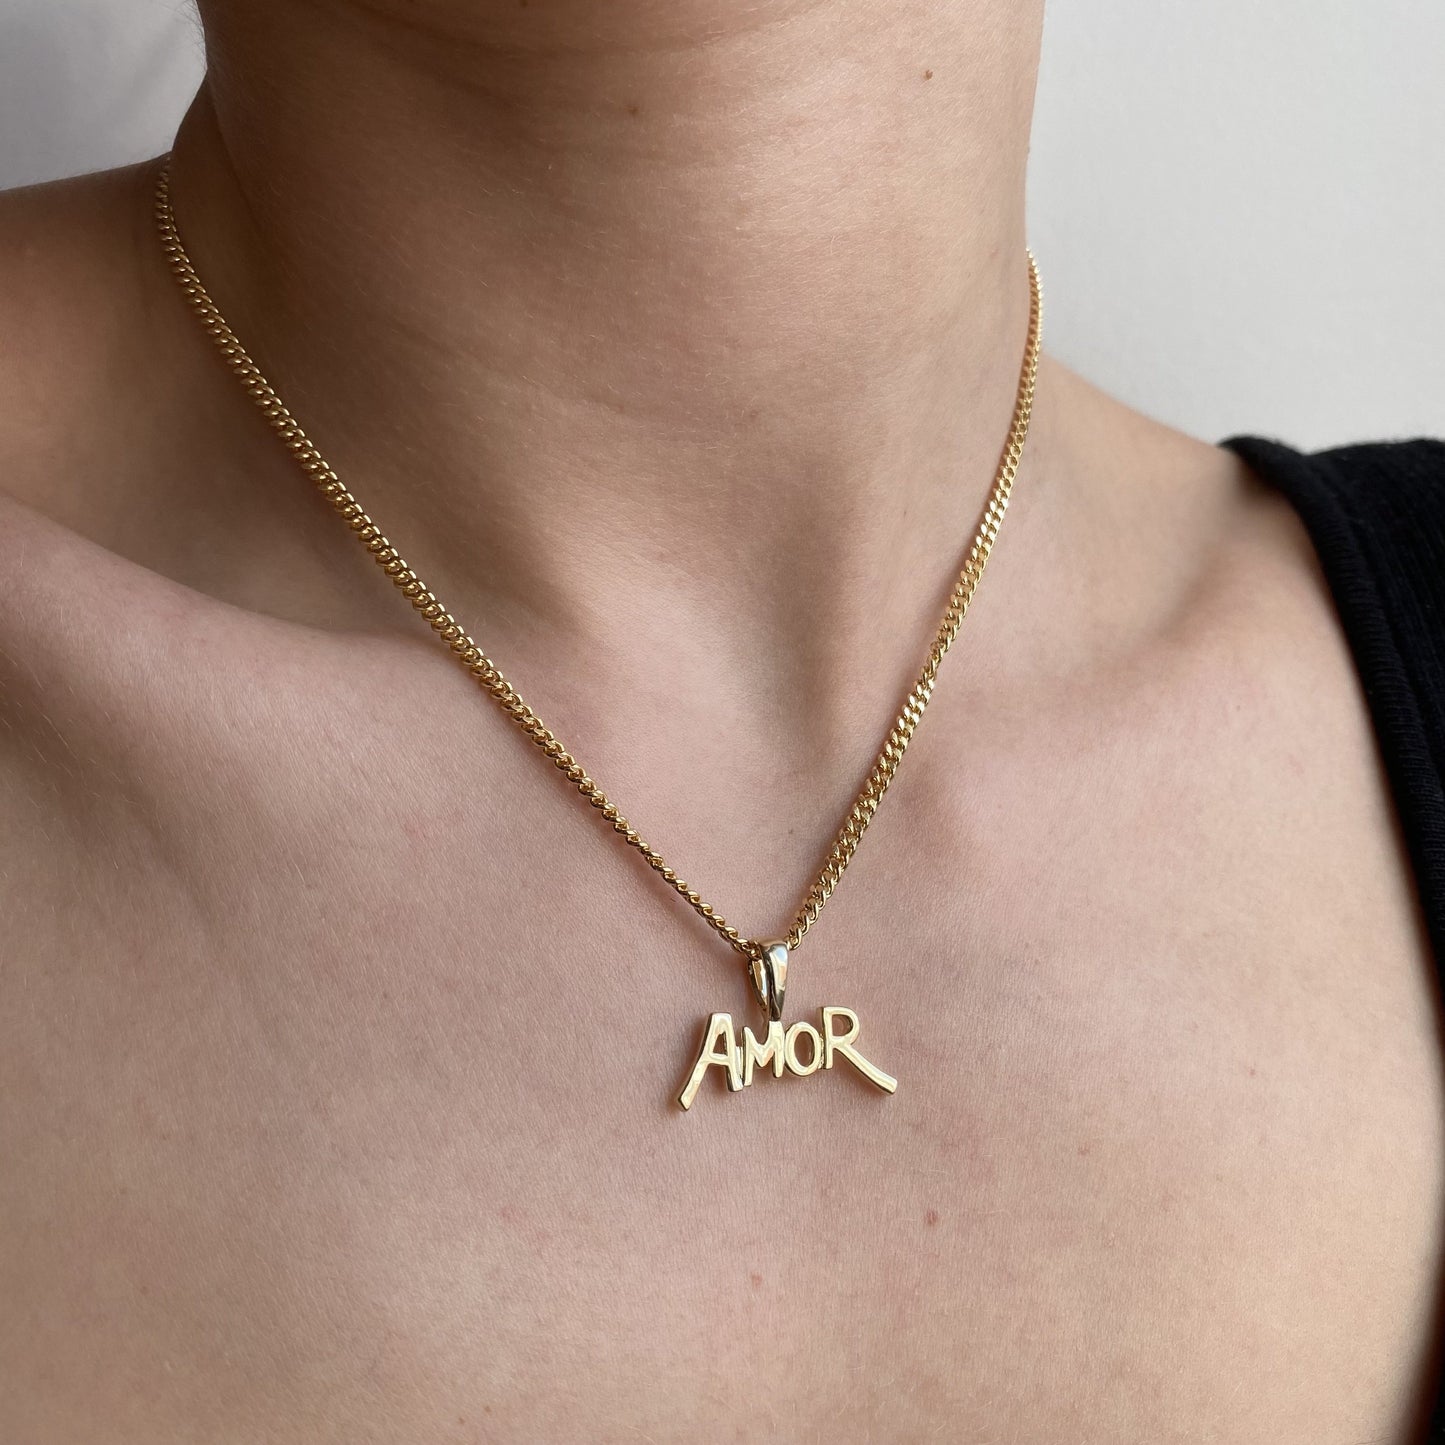 Amor Necklace - Veooy